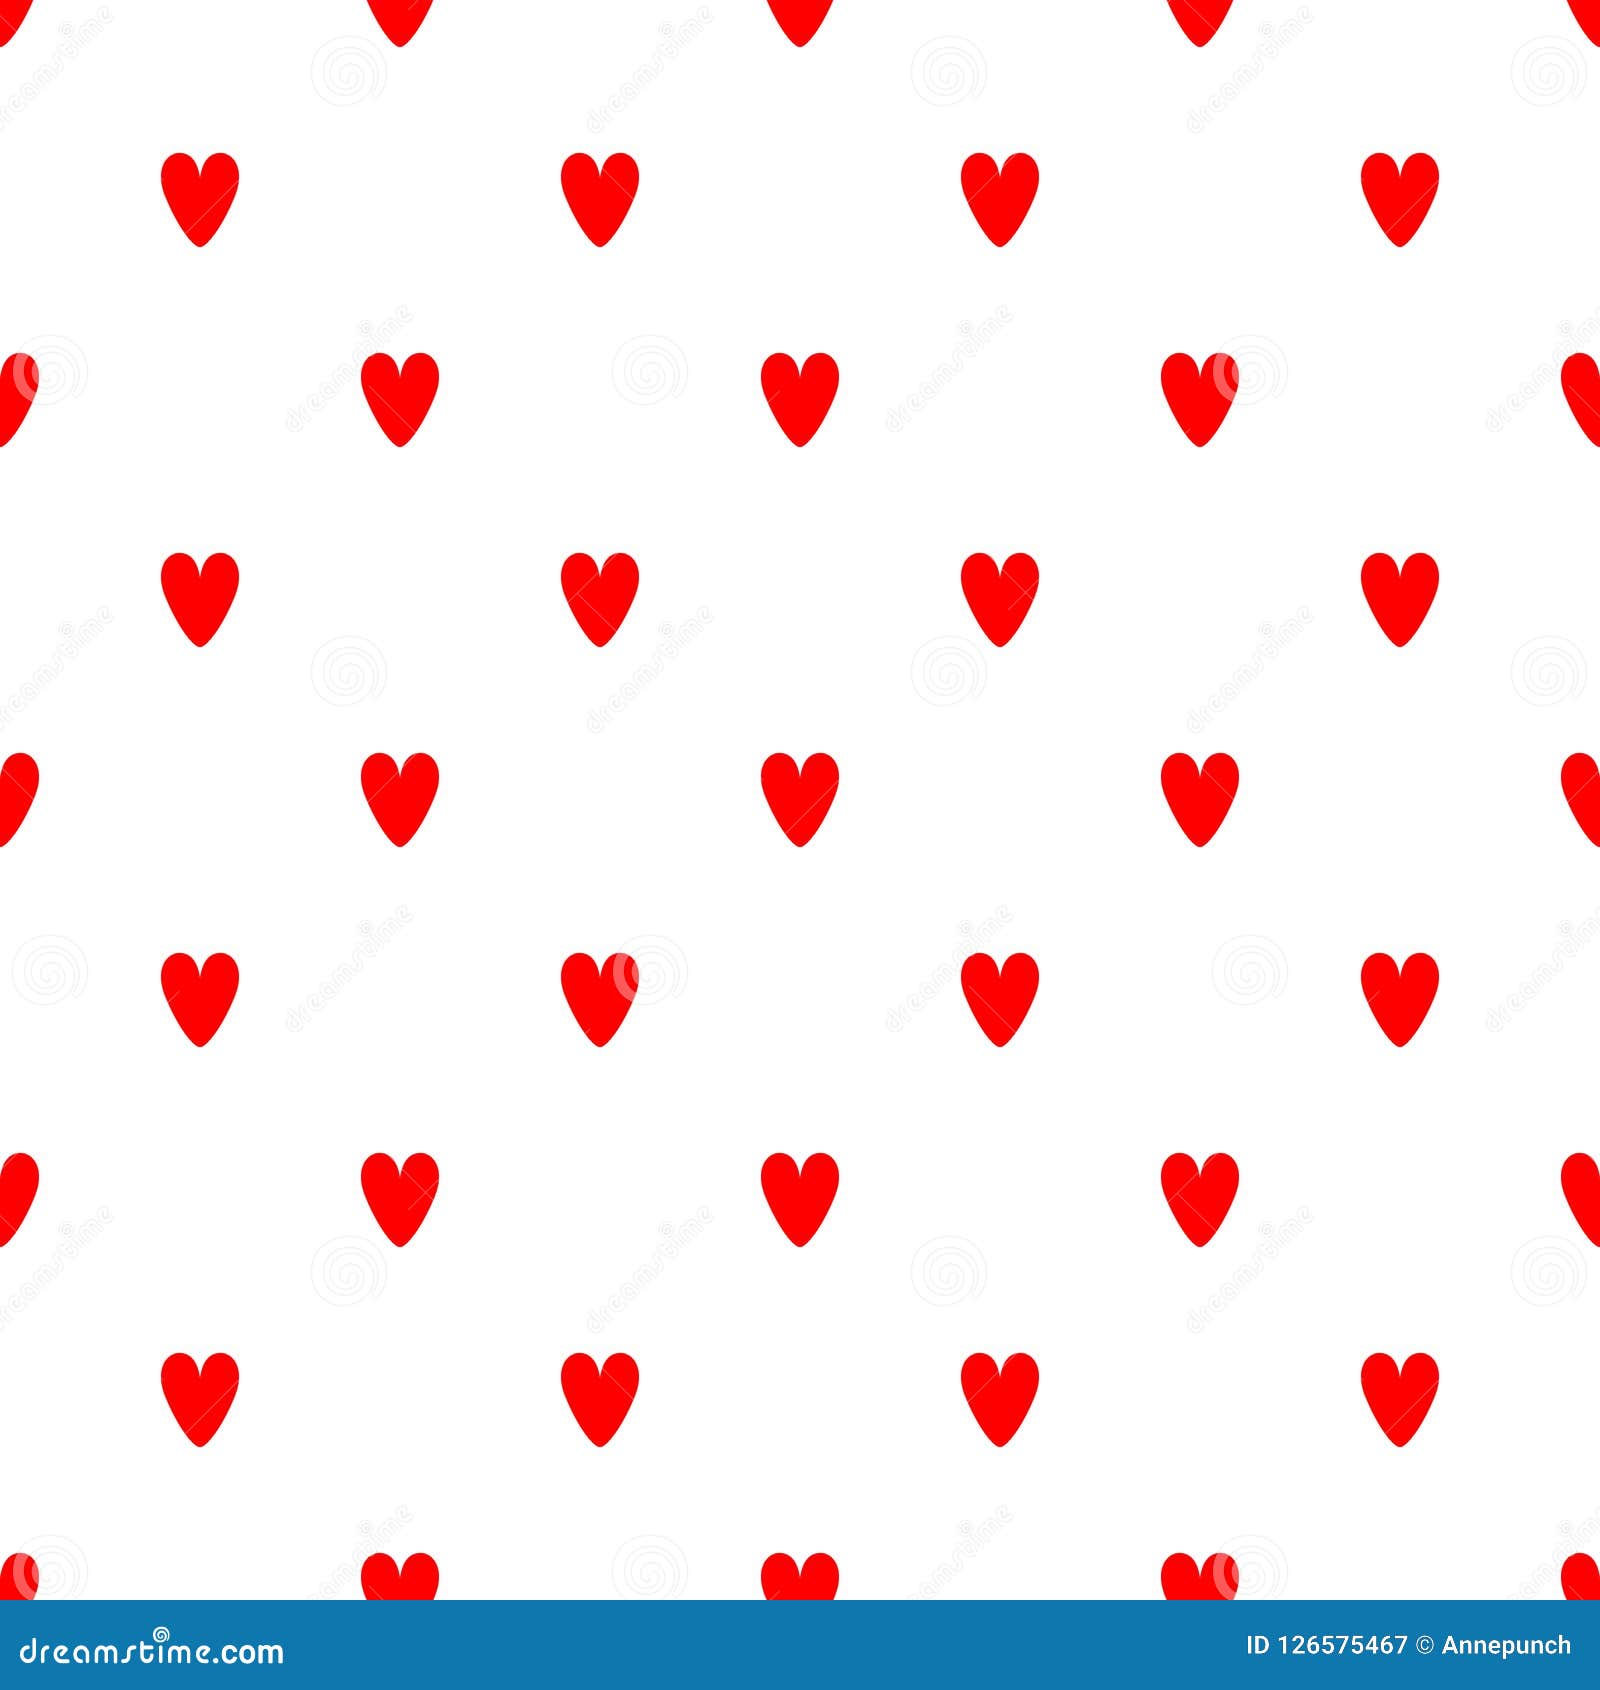 Simple Romantic Seamless Pattern with Repeating Red Hearts on White  Background. Stock Vector - Illustration of background, vintage: 126575467